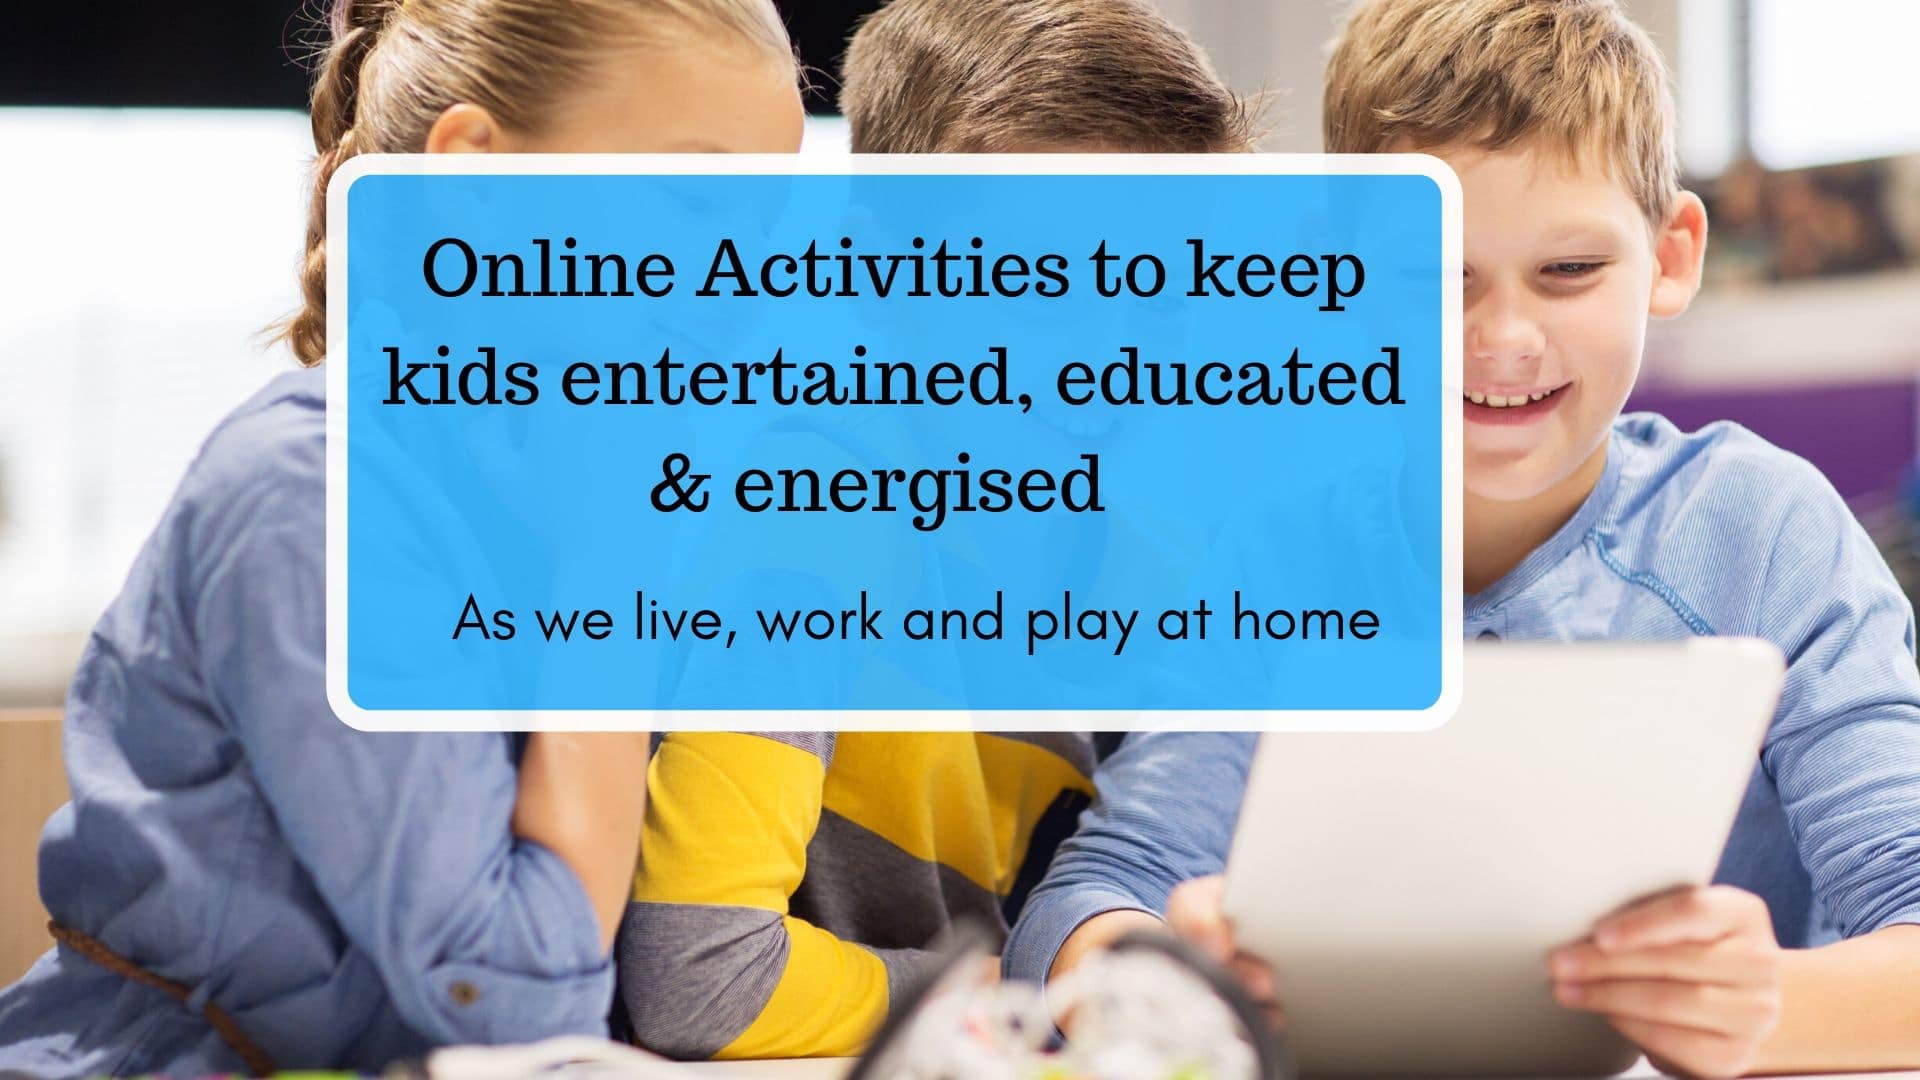 Online activities to keep kids entertained, educated and energised